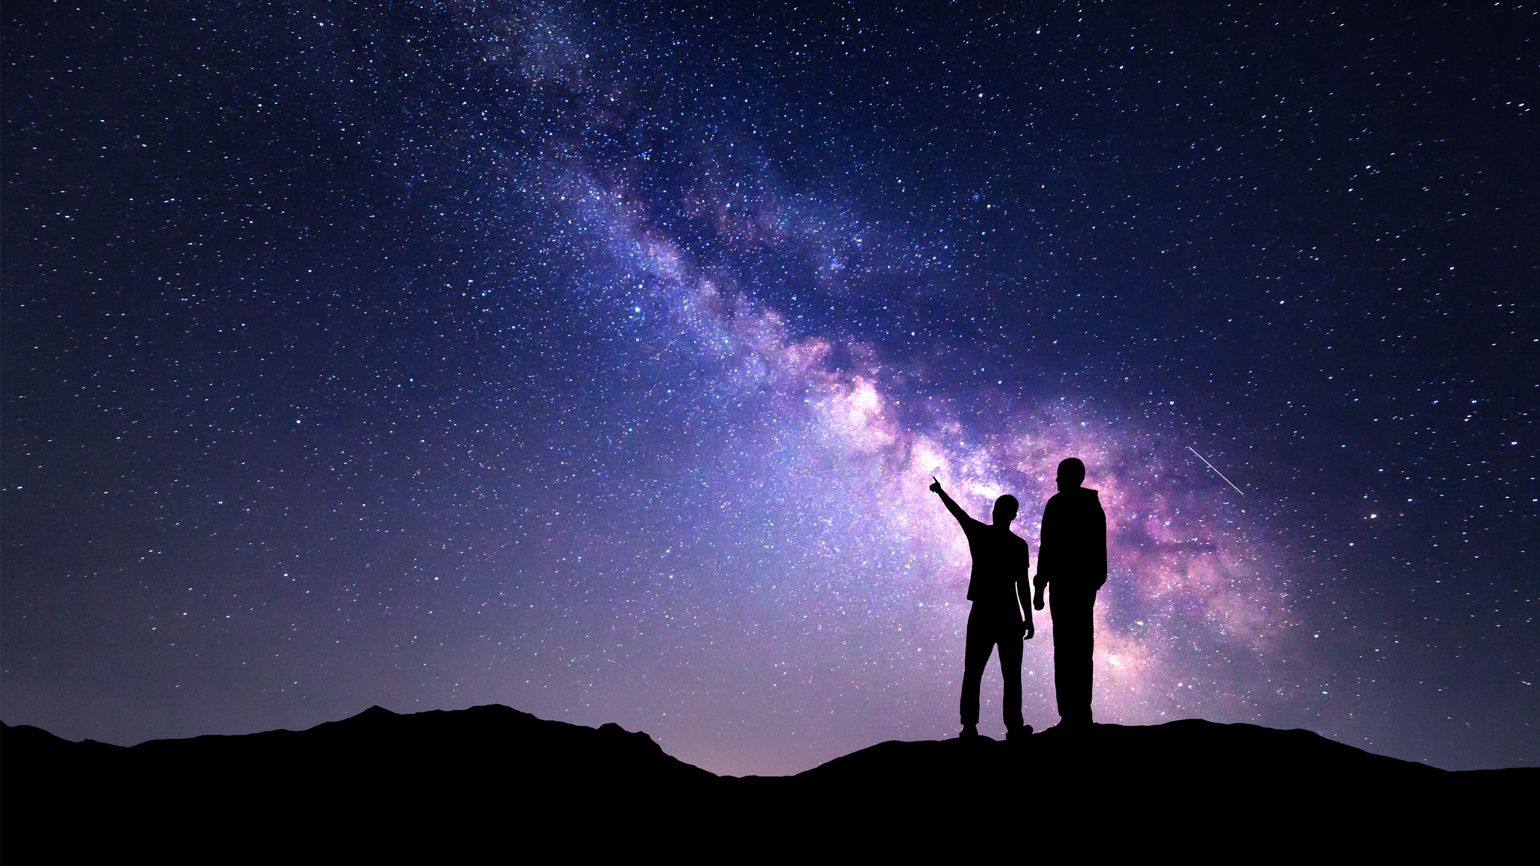 Two silhouettes of people stargazing.